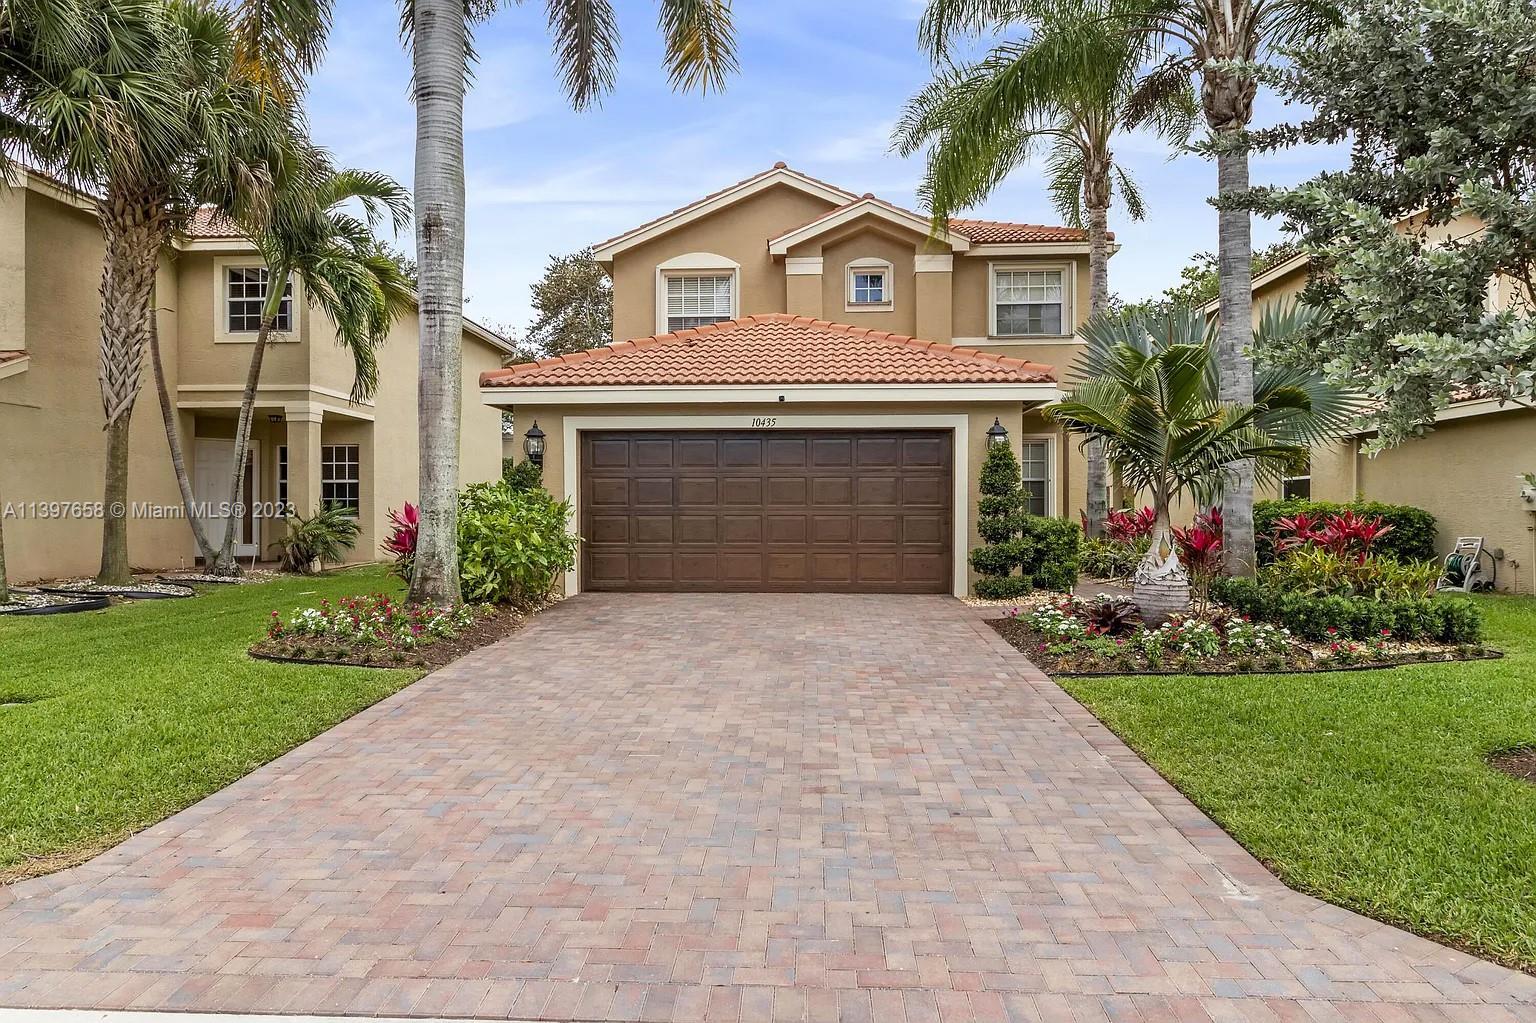 In the heart of Boynton Beach's Greystone community, this tastefully updated 3/2.5 two- story home o